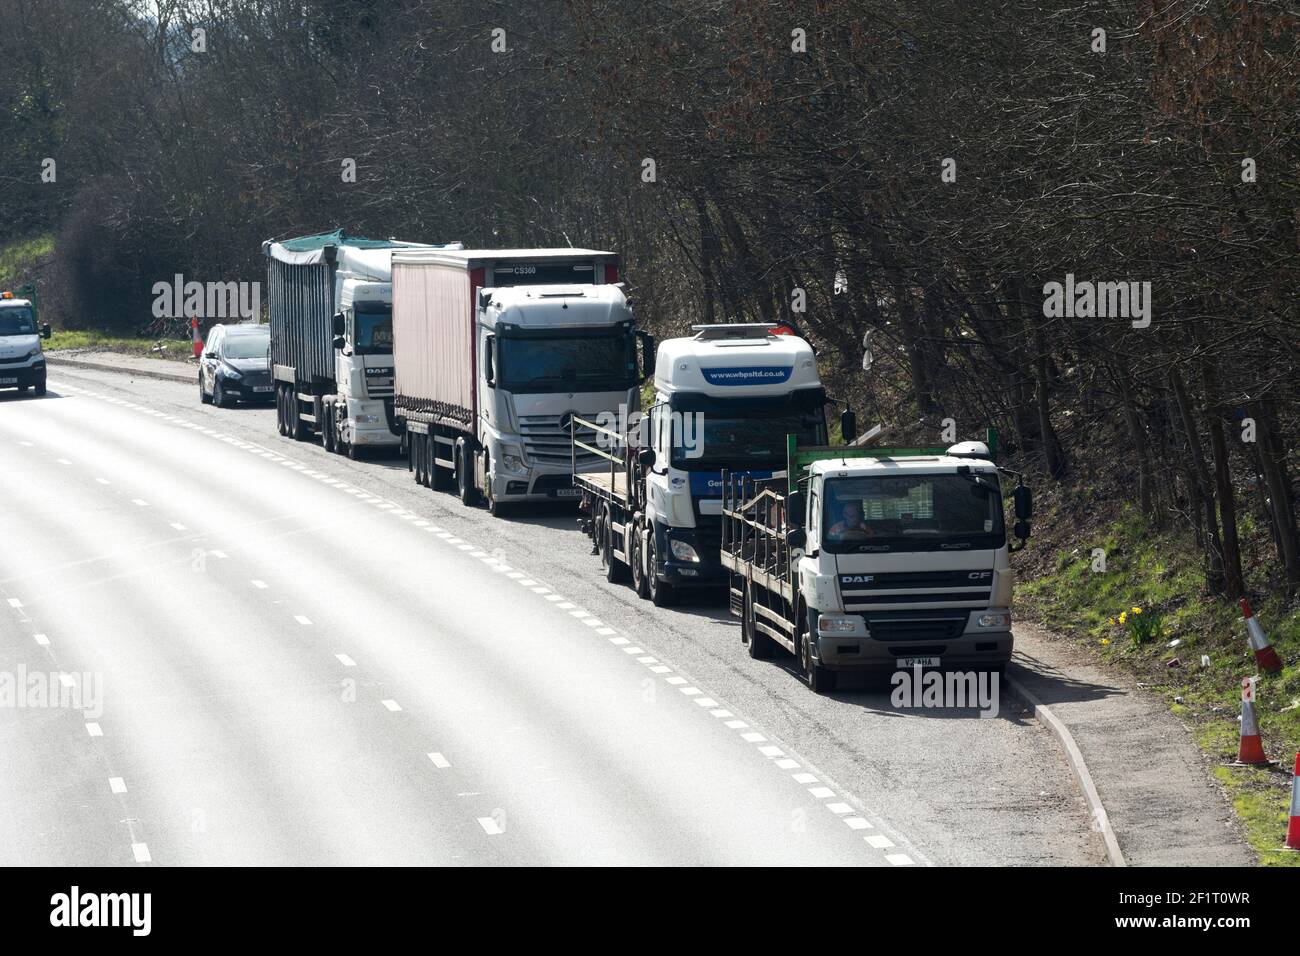 Vehicles parked in a lay-by on the A46 road, Leek Wootton, Warwickshire, England, UK Stock Photo